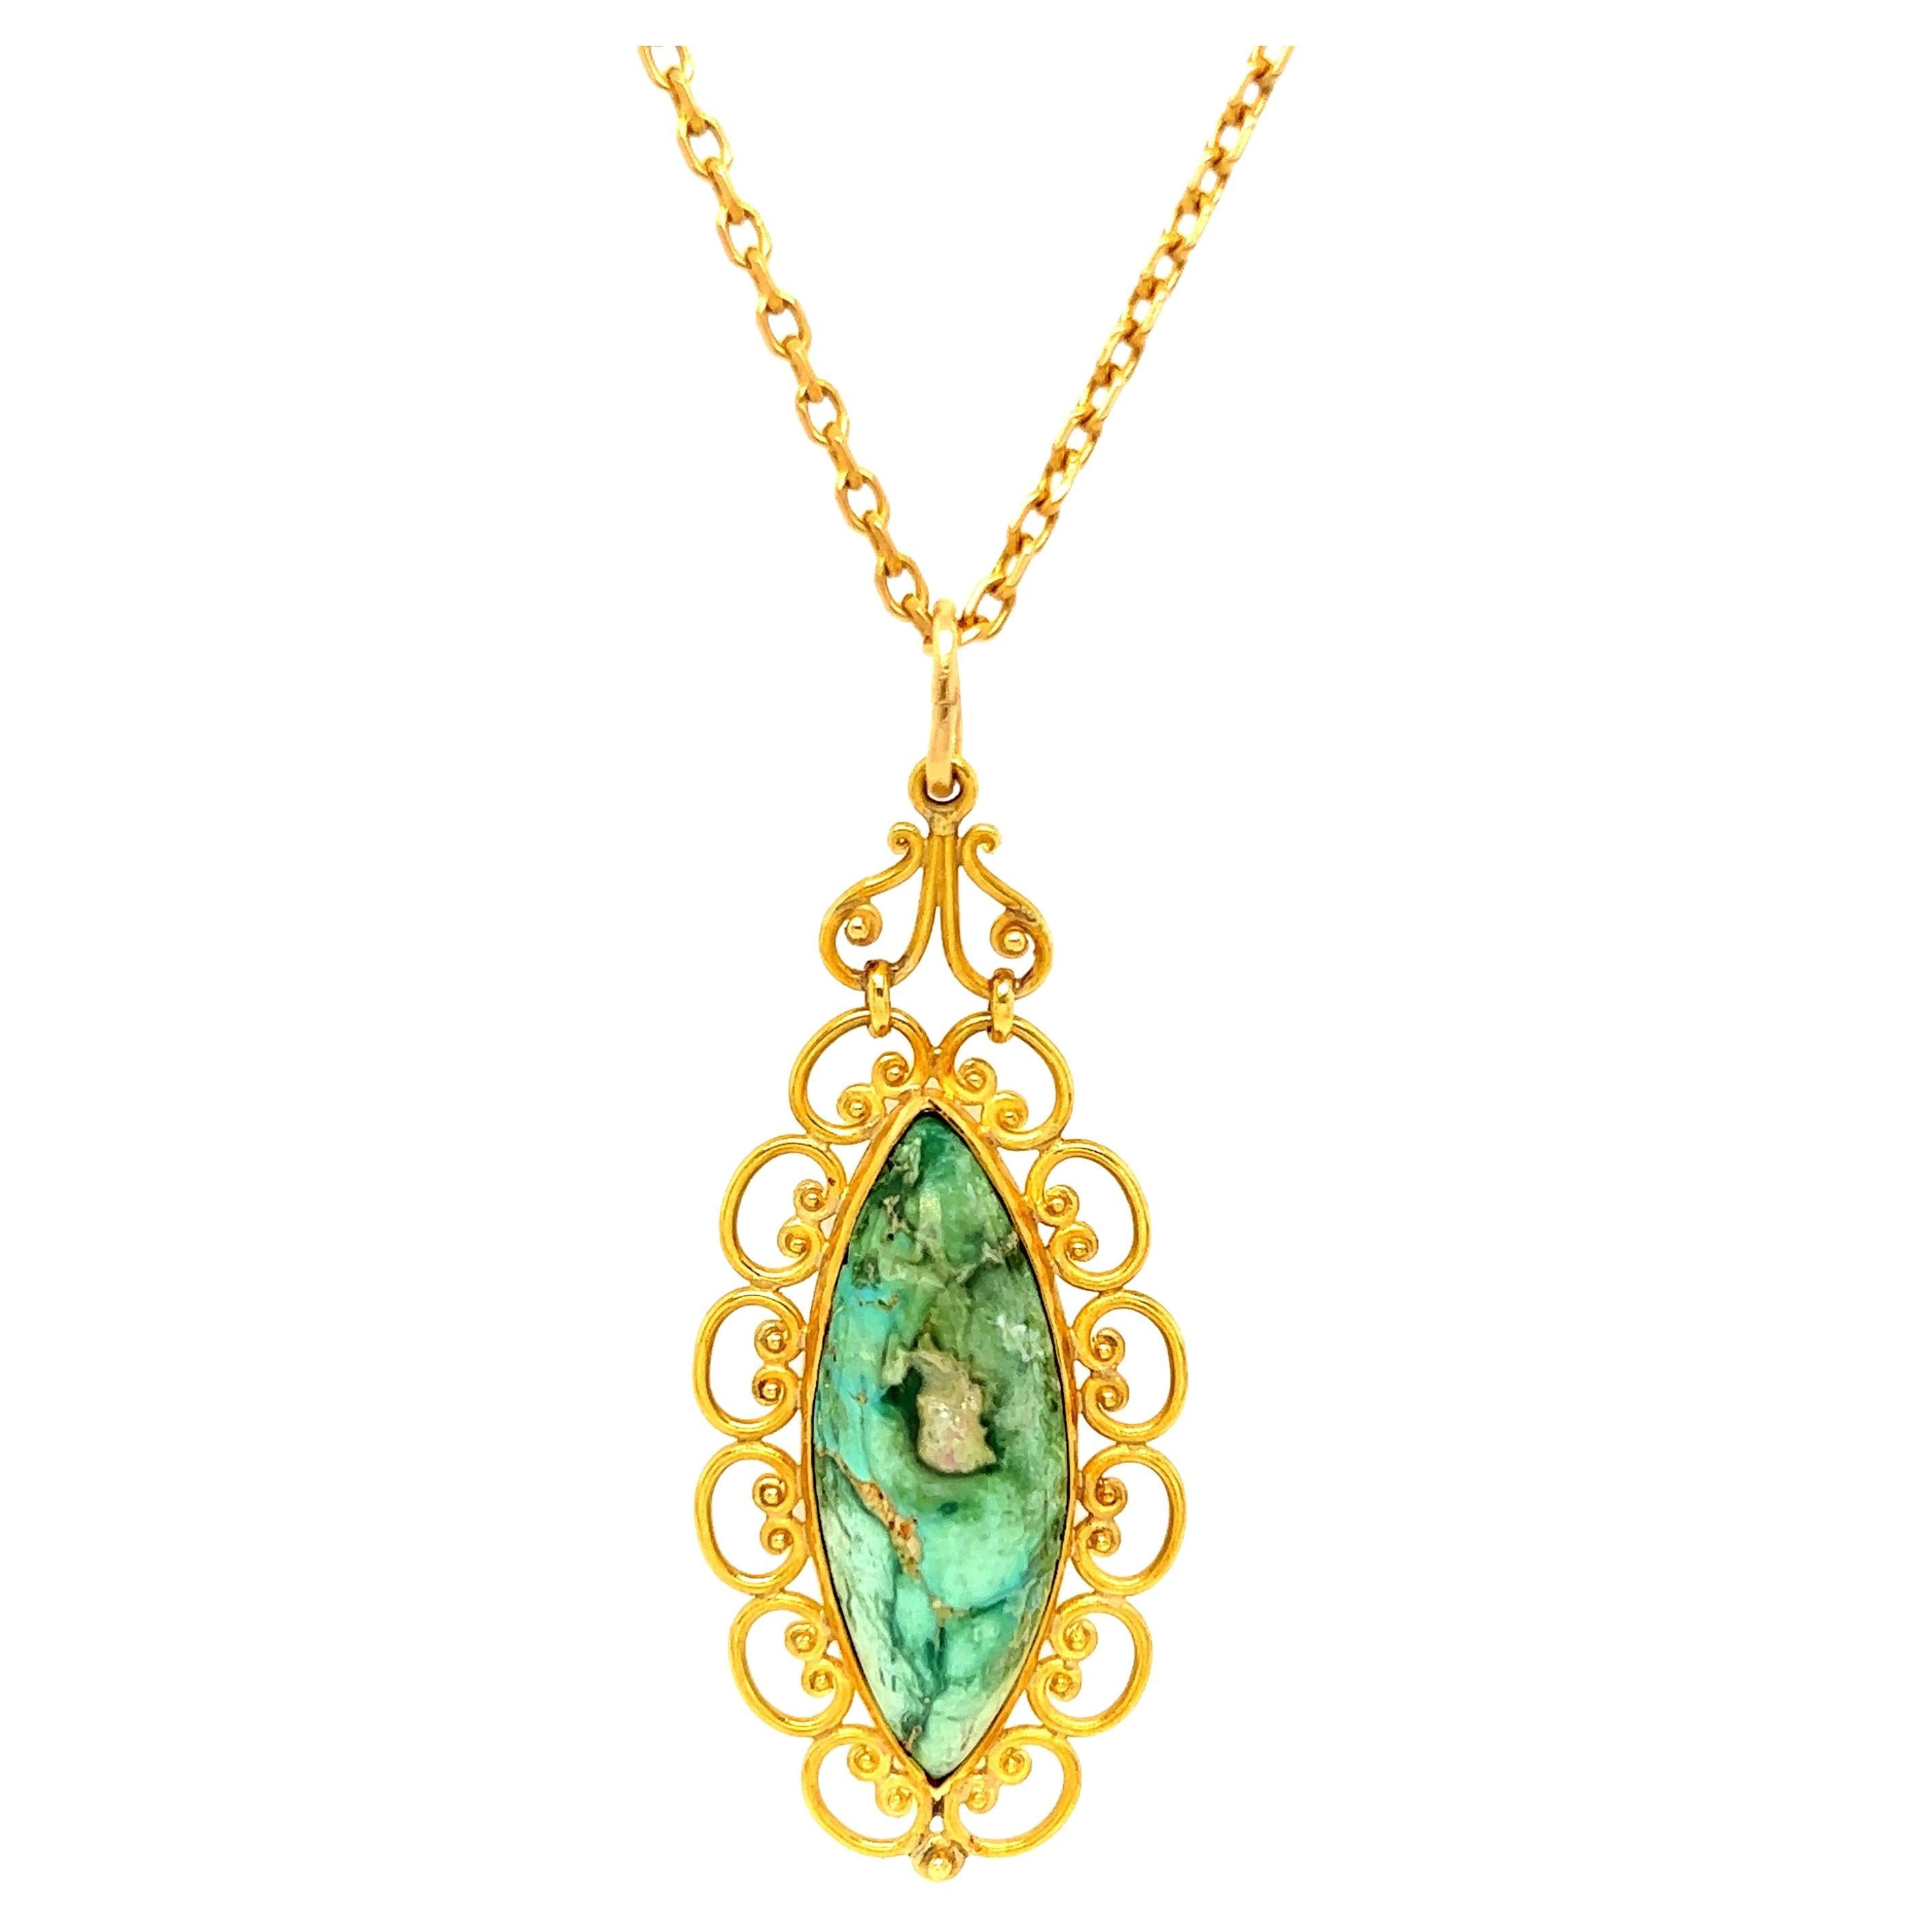 Vintage 18K Yellow Gold Turquoise Pendant and Long Chain